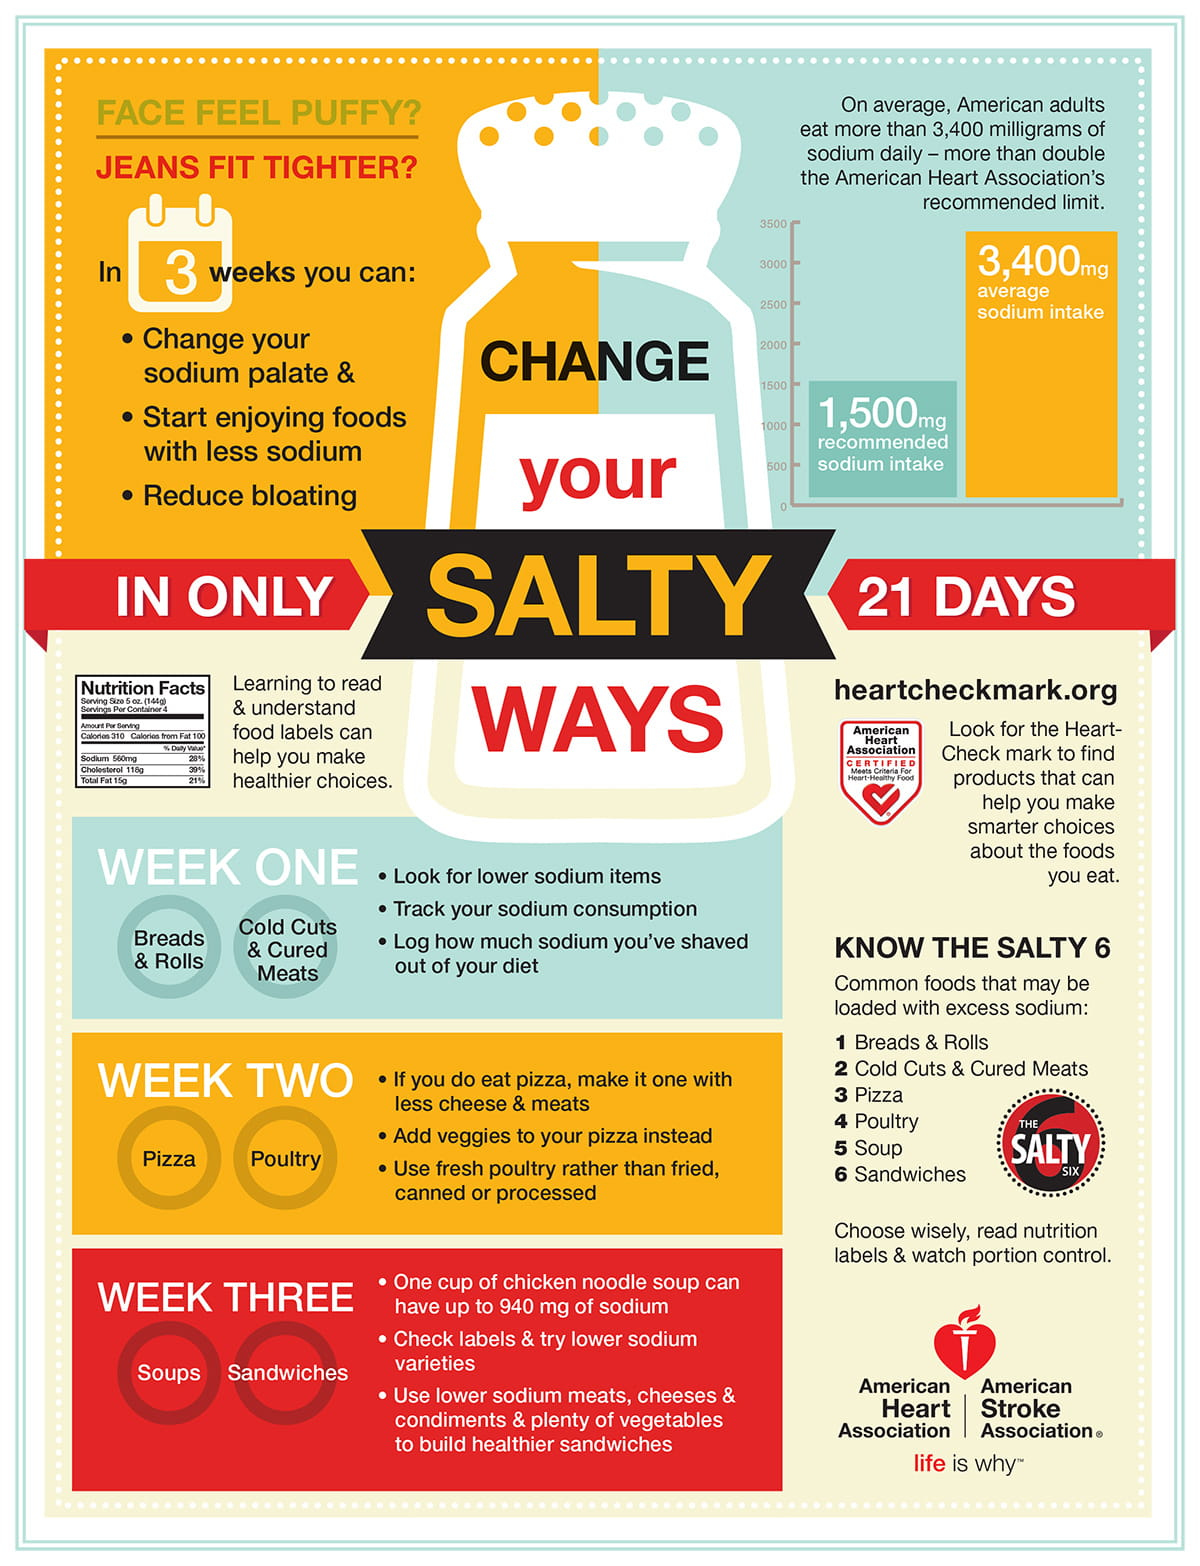 Sodium Swap Change Your Salty Ways In 21 Days Infographic 